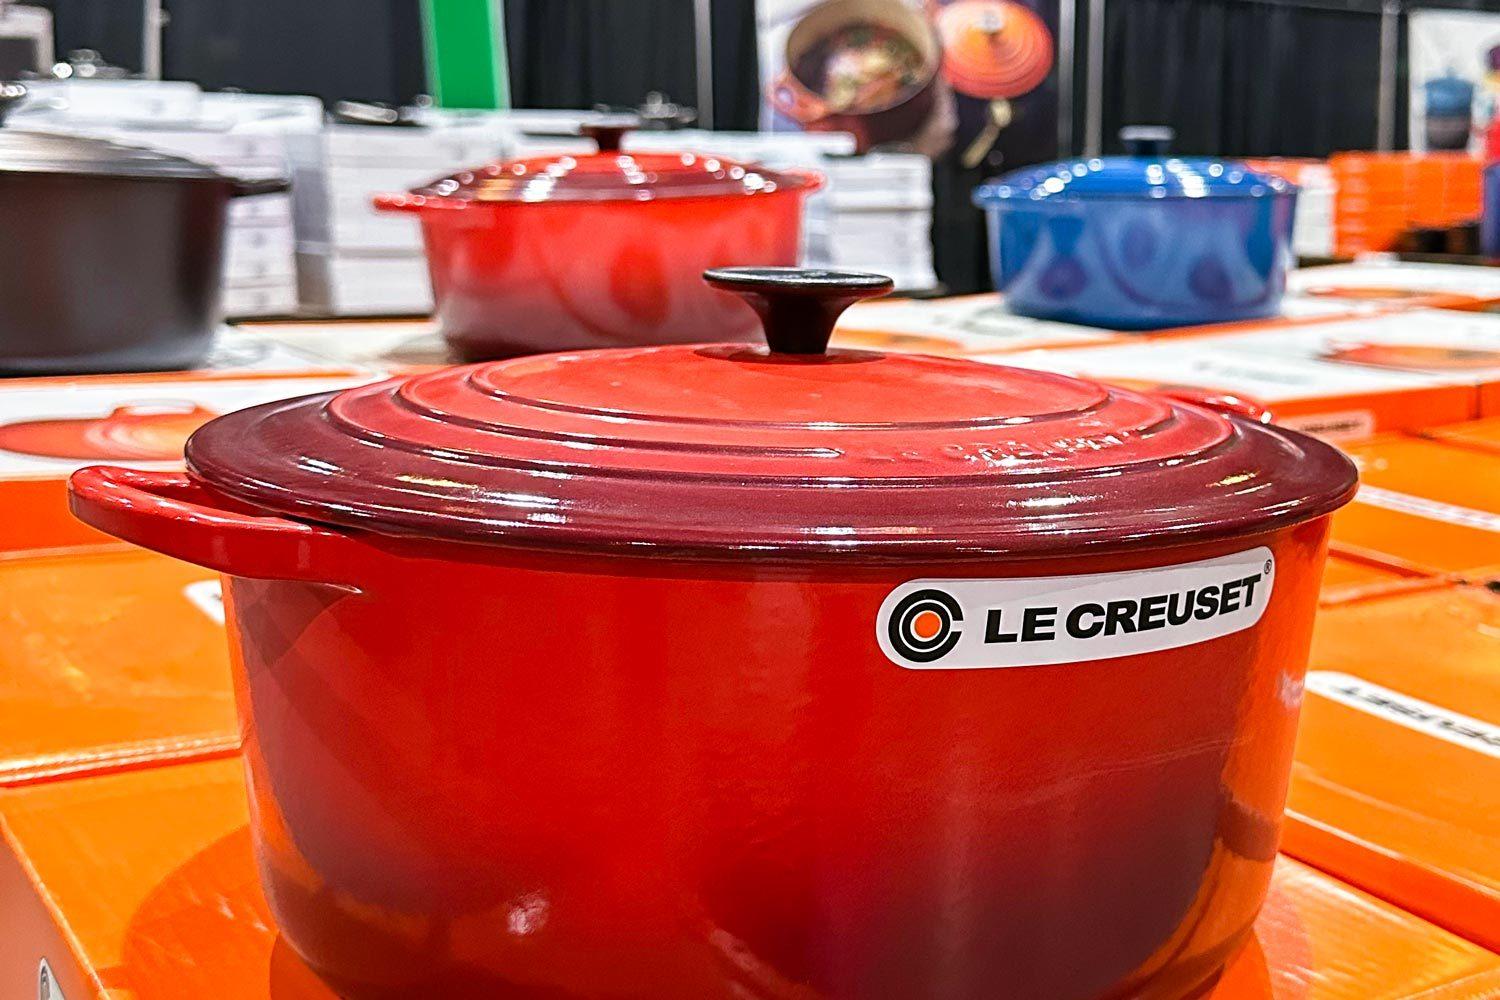 Le Creuset's Factory to Table sale is returning to Pomona, California